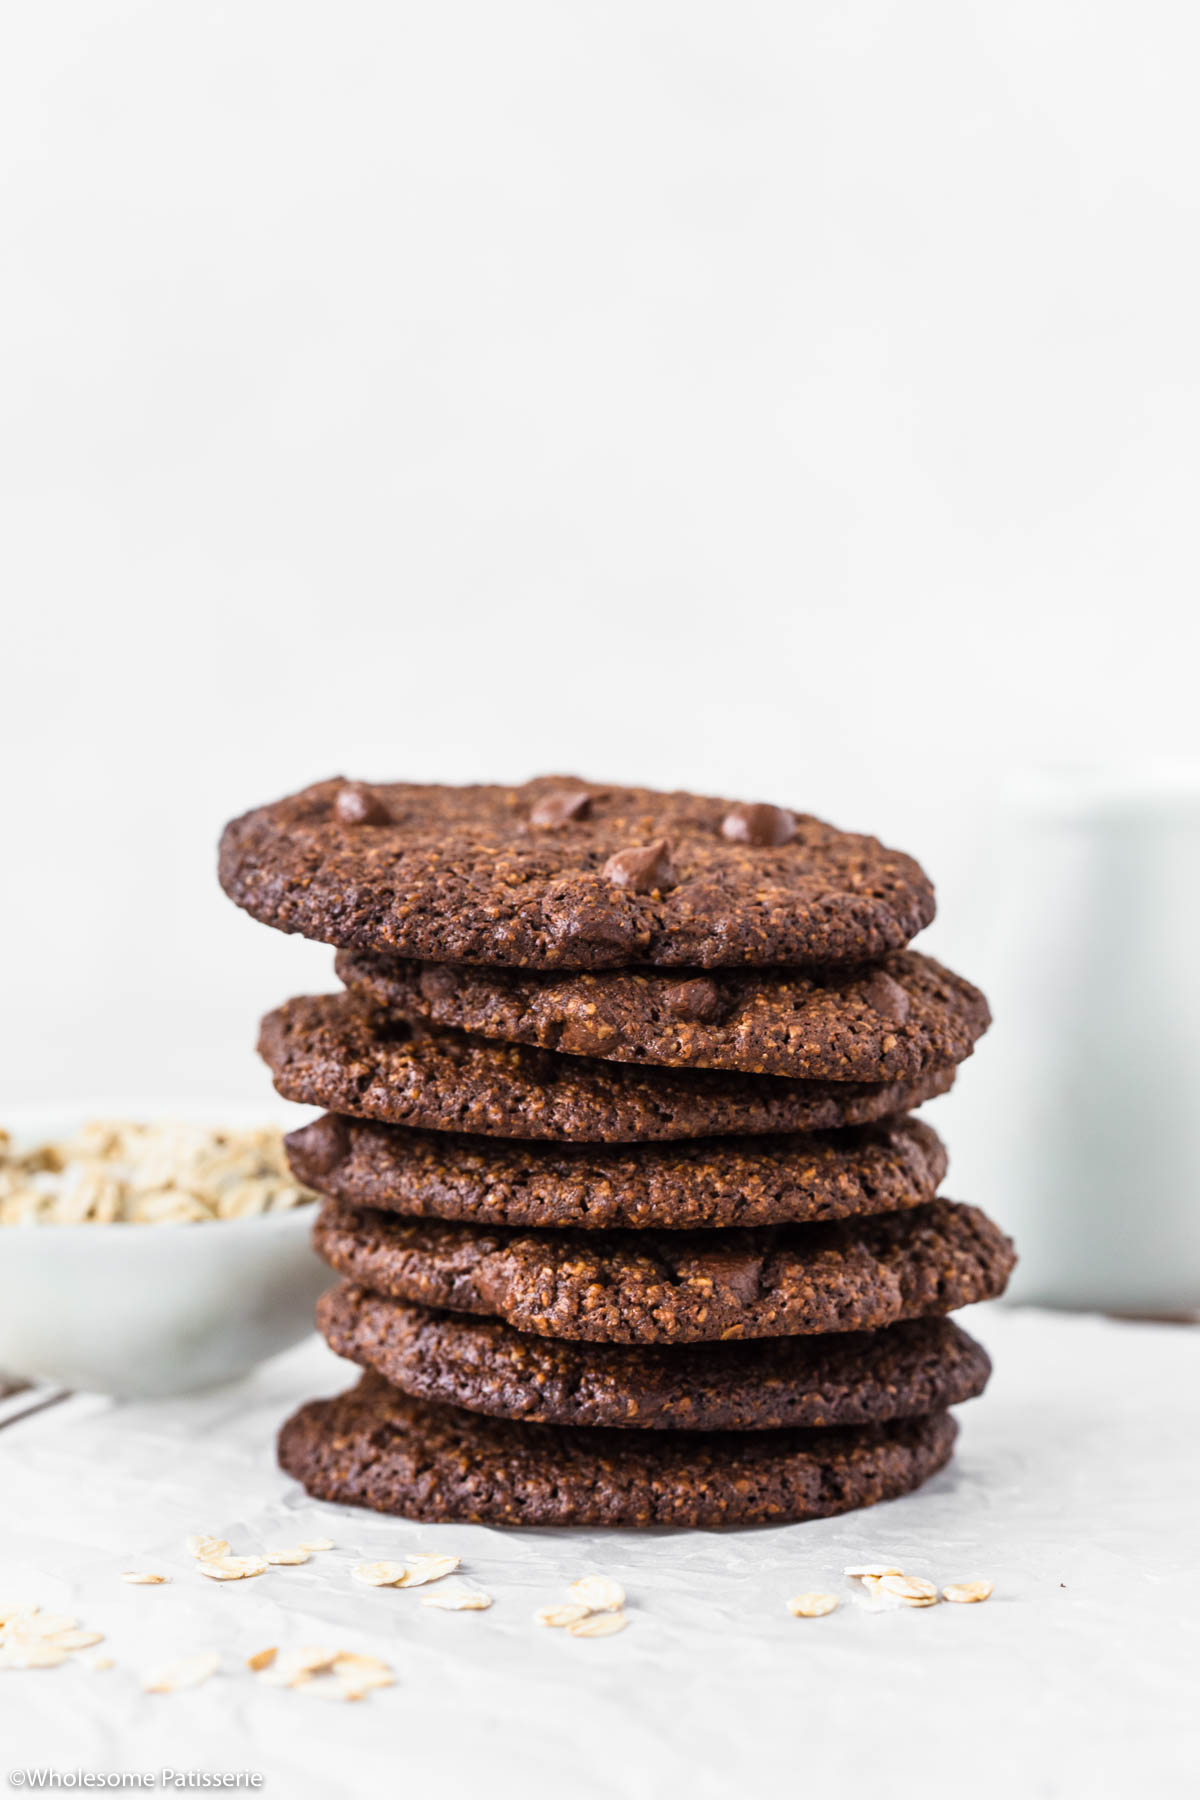 Stack of oat flour chocolate chip cookies